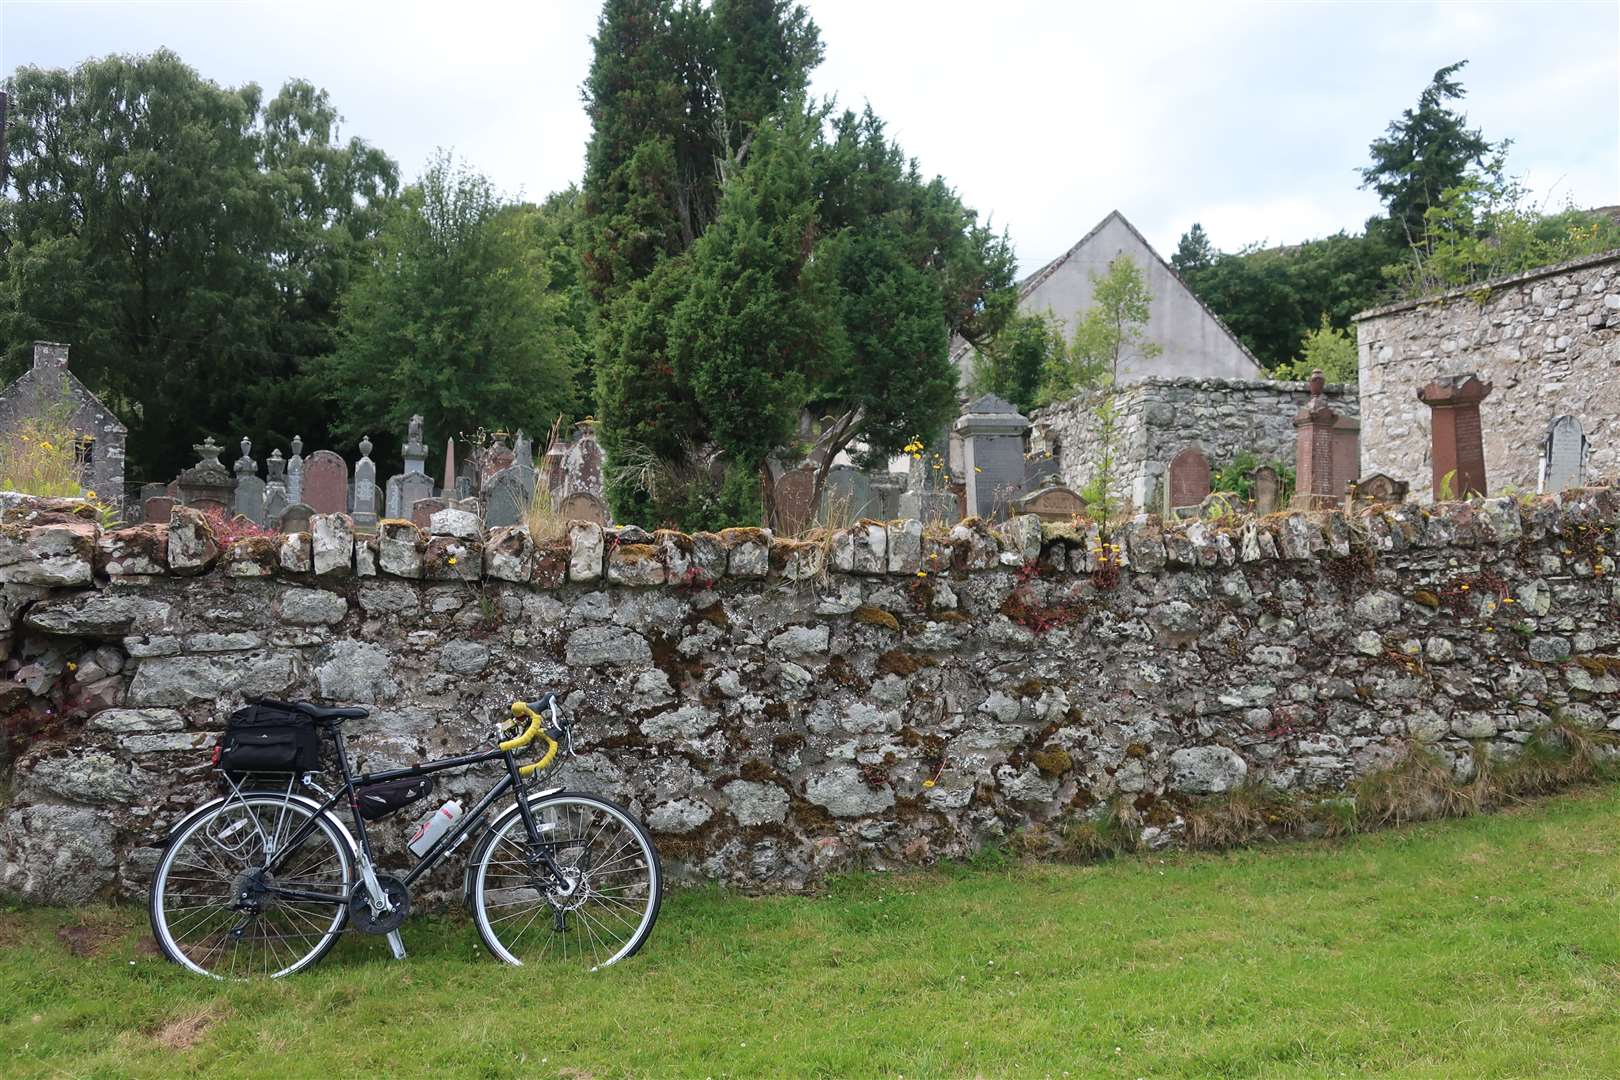 The church and graveyard at Dunlichity.